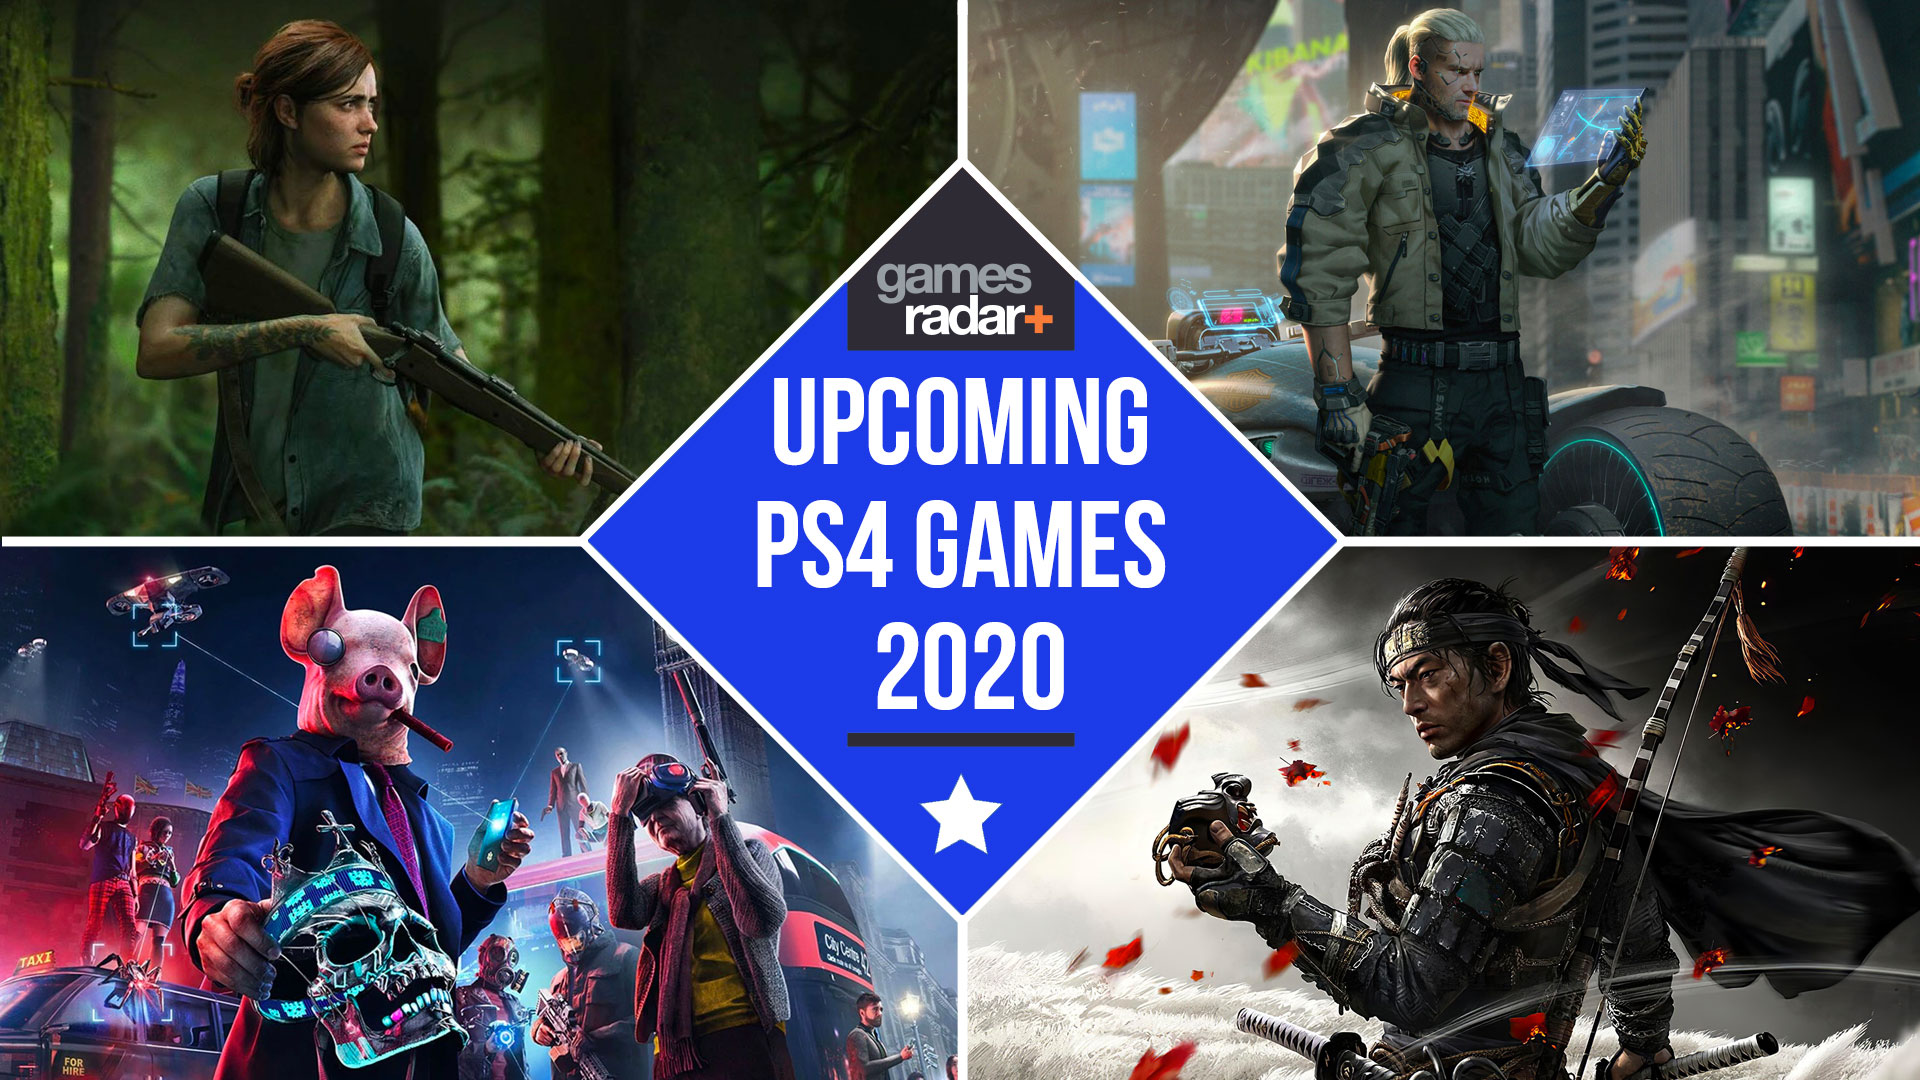 The Upcoming Ps4 Games For 2020 And Beyond Gamesradar